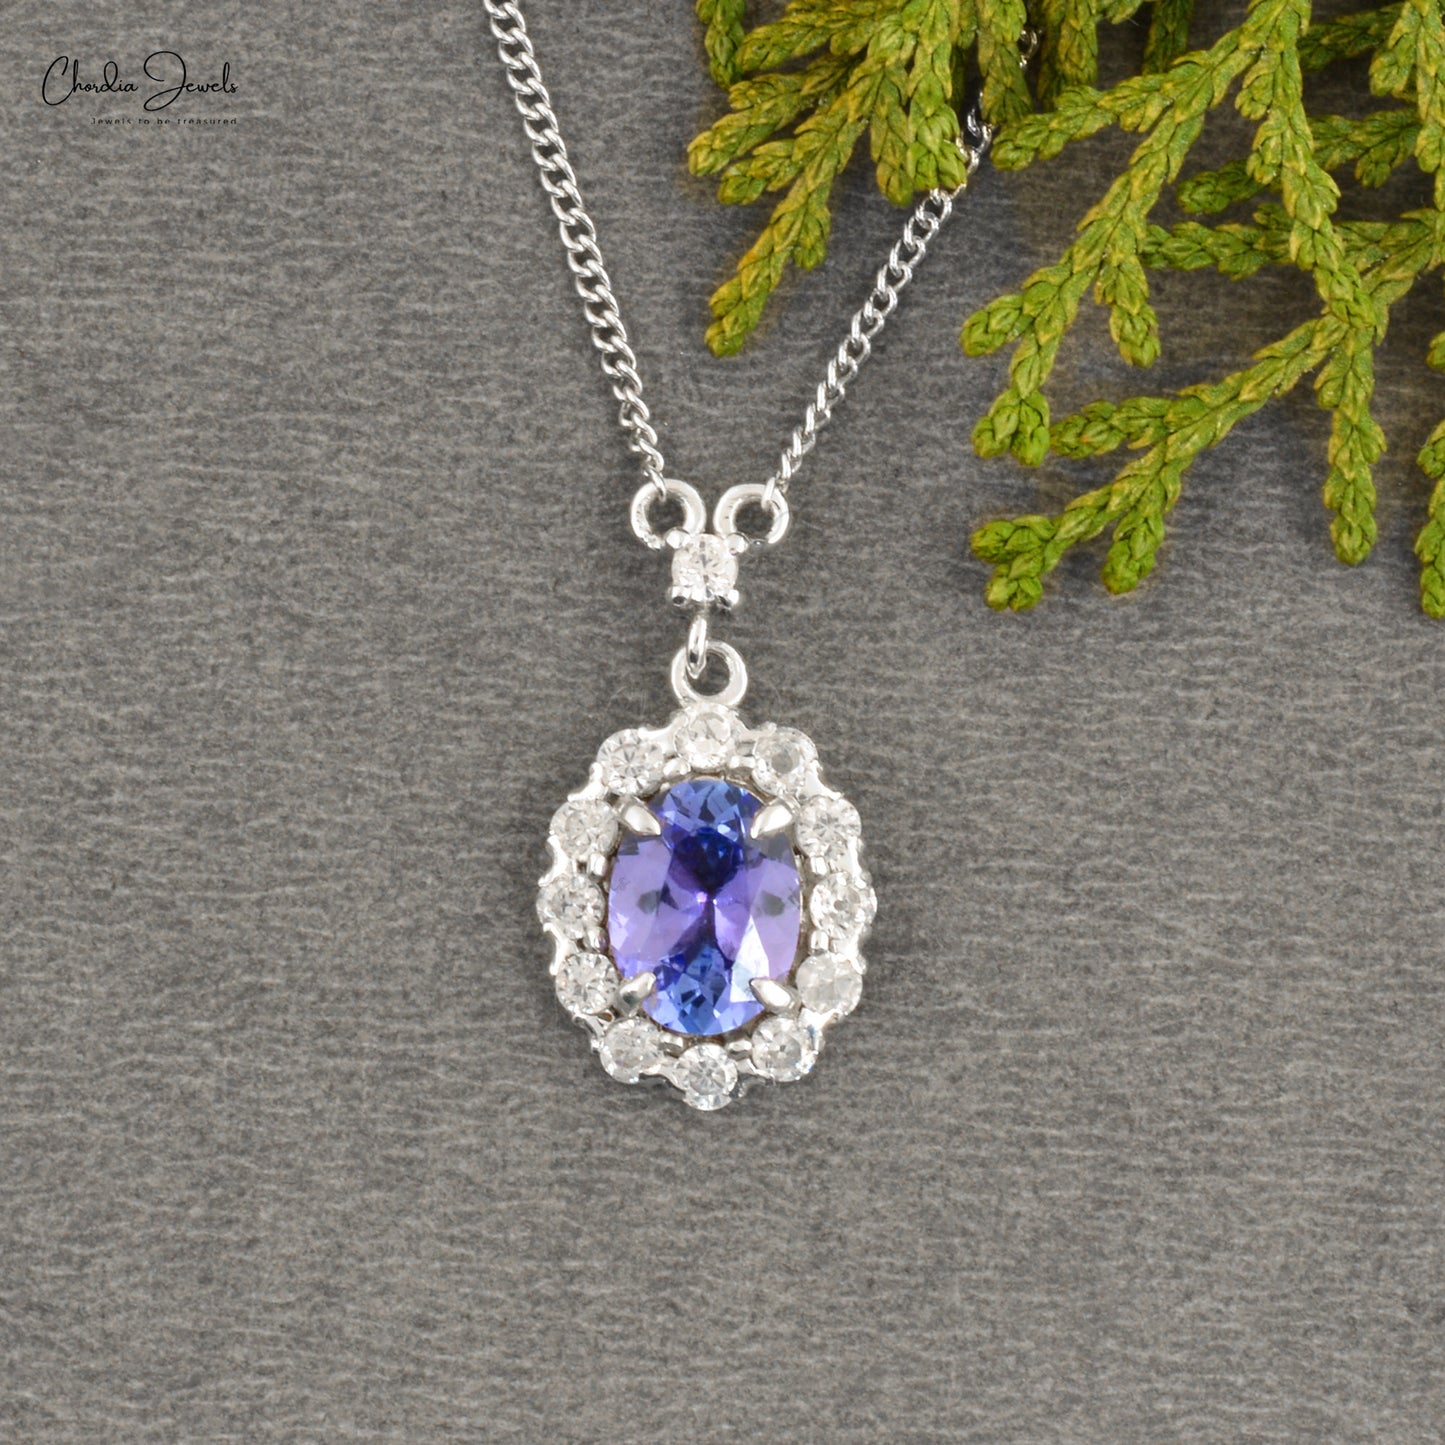 Load image into Gallery viewer, 925 Sterling Silver Halo Pendant Genuine Tanzanite Oval Cut Pendant 2.2MM Cubic Zircon Half Bezel Pendant At Wholesale Price
